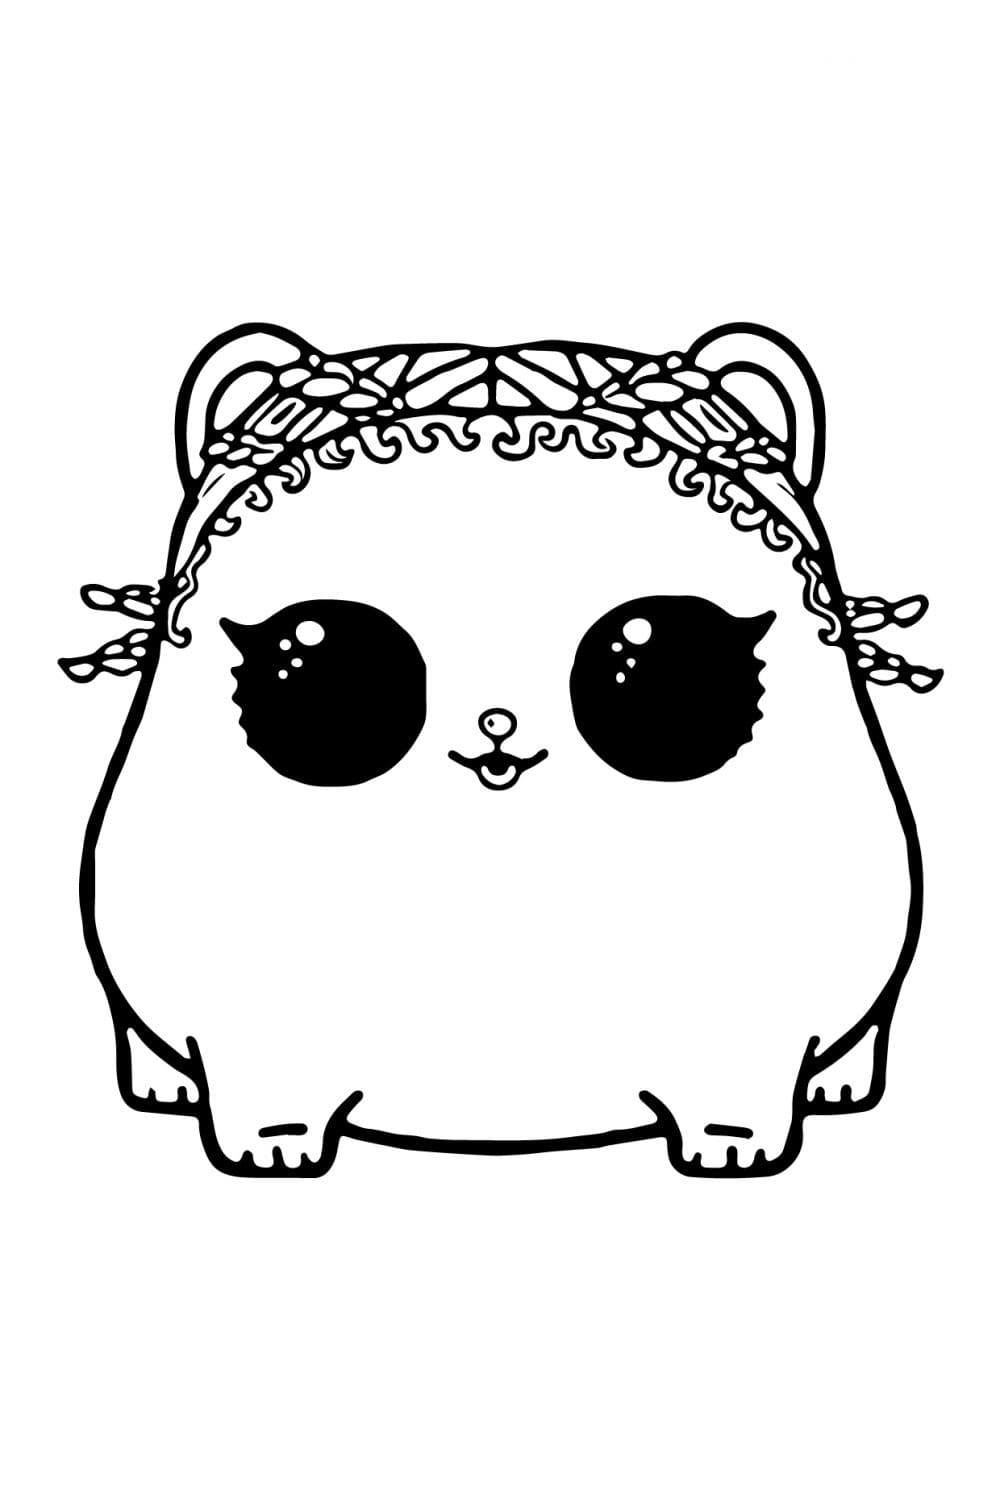 lol pets hamster coloring page free printable coloring pages for kids